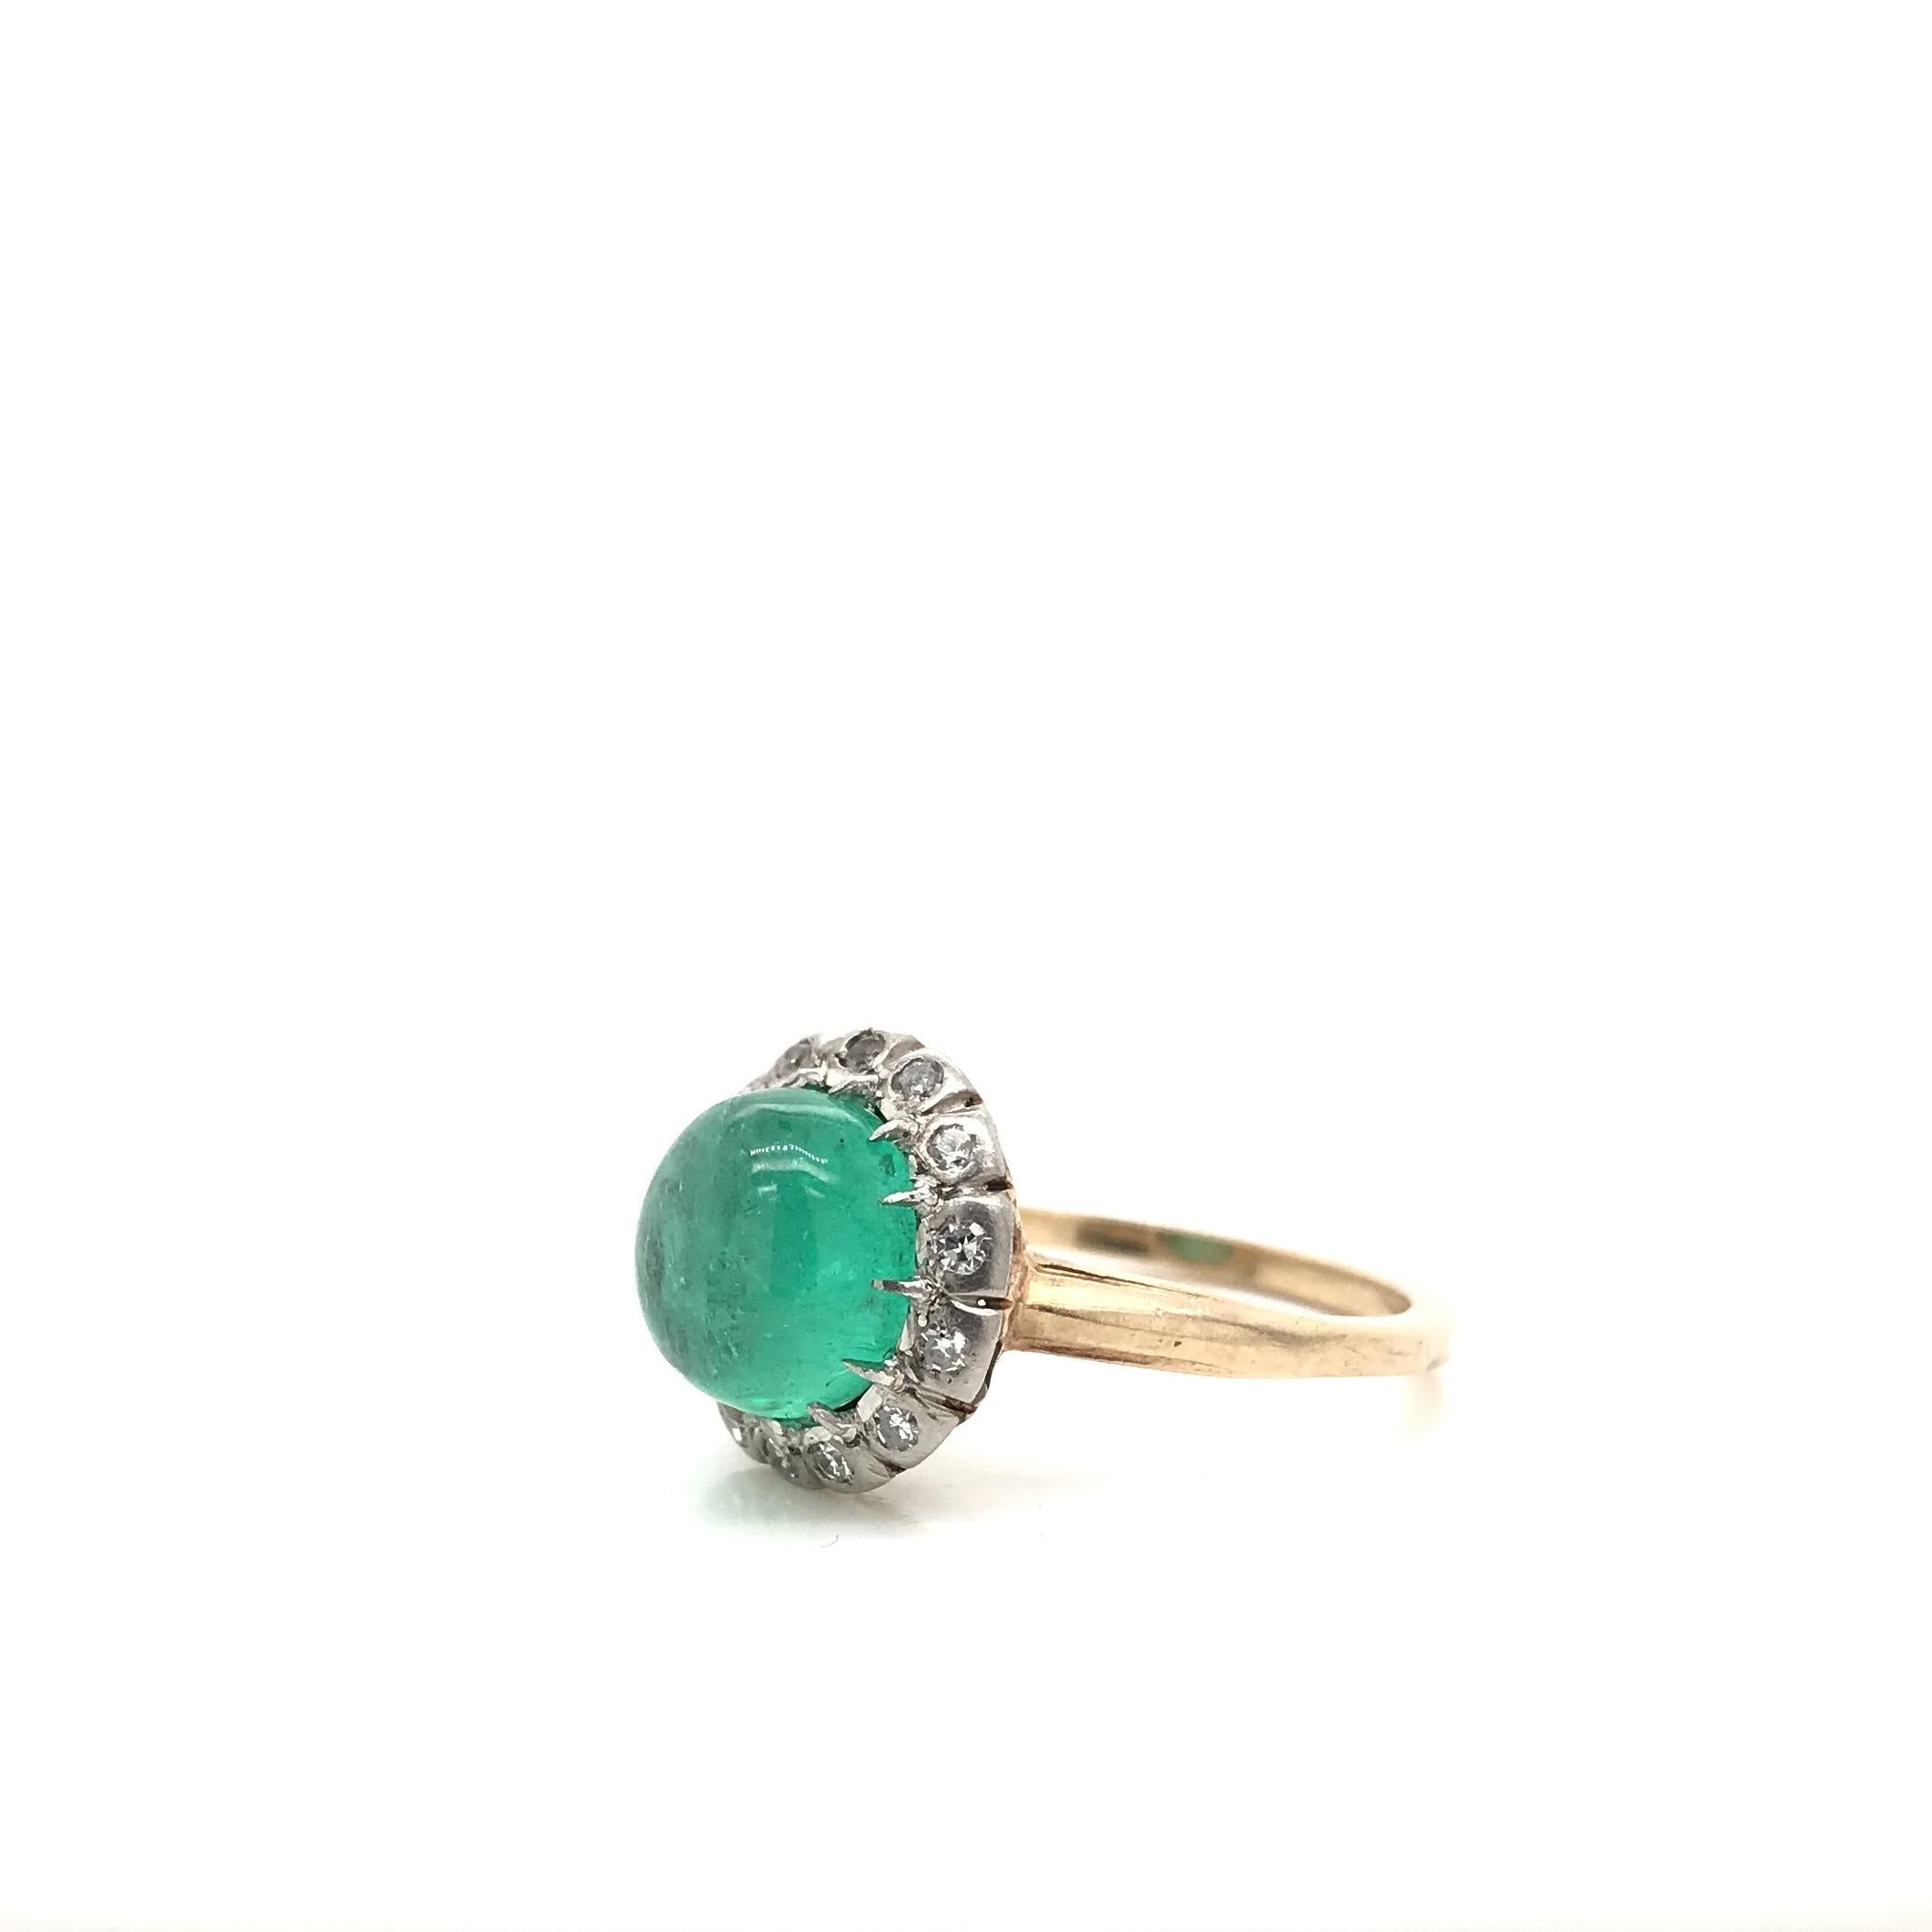 This stunning antique piece was crafted sometime during the Edwardian design period (1900-1920). The 14K gold setting features a center cabochon cut emerald measuring approximately 3 carats. Cabochon cut gemstones are unfaceted, their hue generously